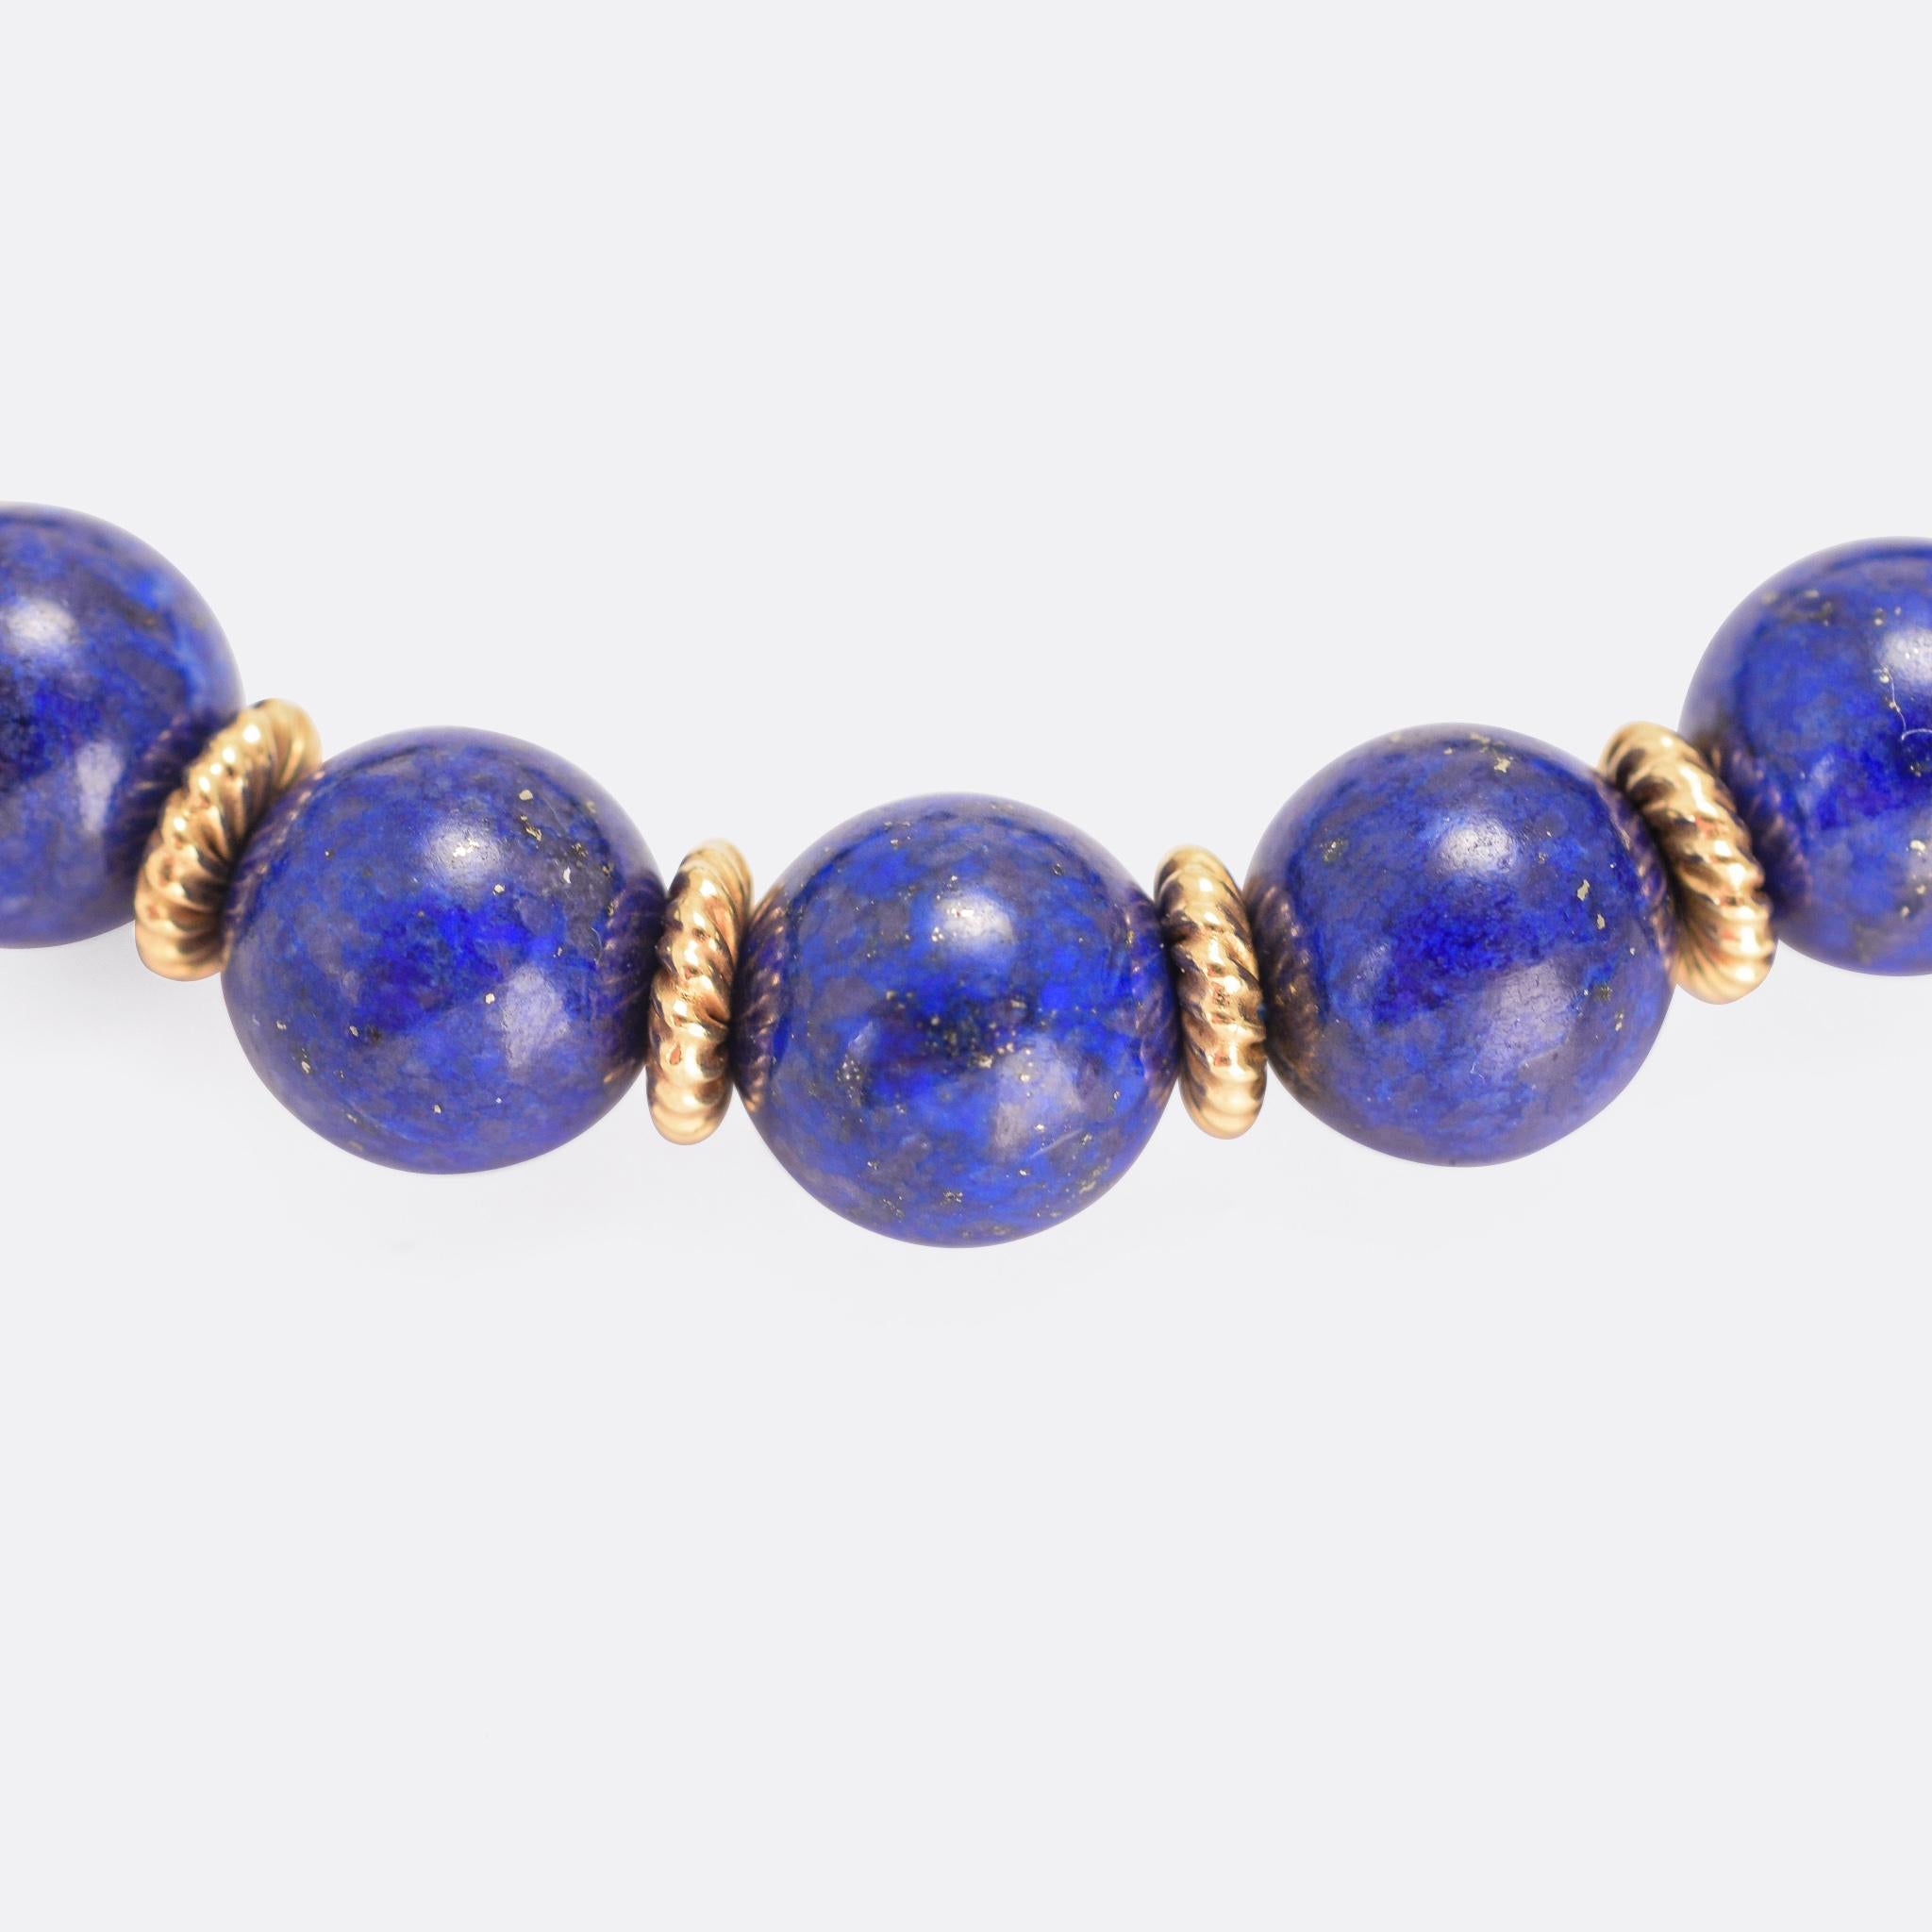 Gorgeous vintage Tiffany & Co lapis bead bracelet, with striking blue stones complemented perfectly by yellow gold spacers. It dates from the 1960s, crafted in 14 karat gold and of superb quality and taste.

STONES 
Lapis Lazuli

MEASUREMENTS